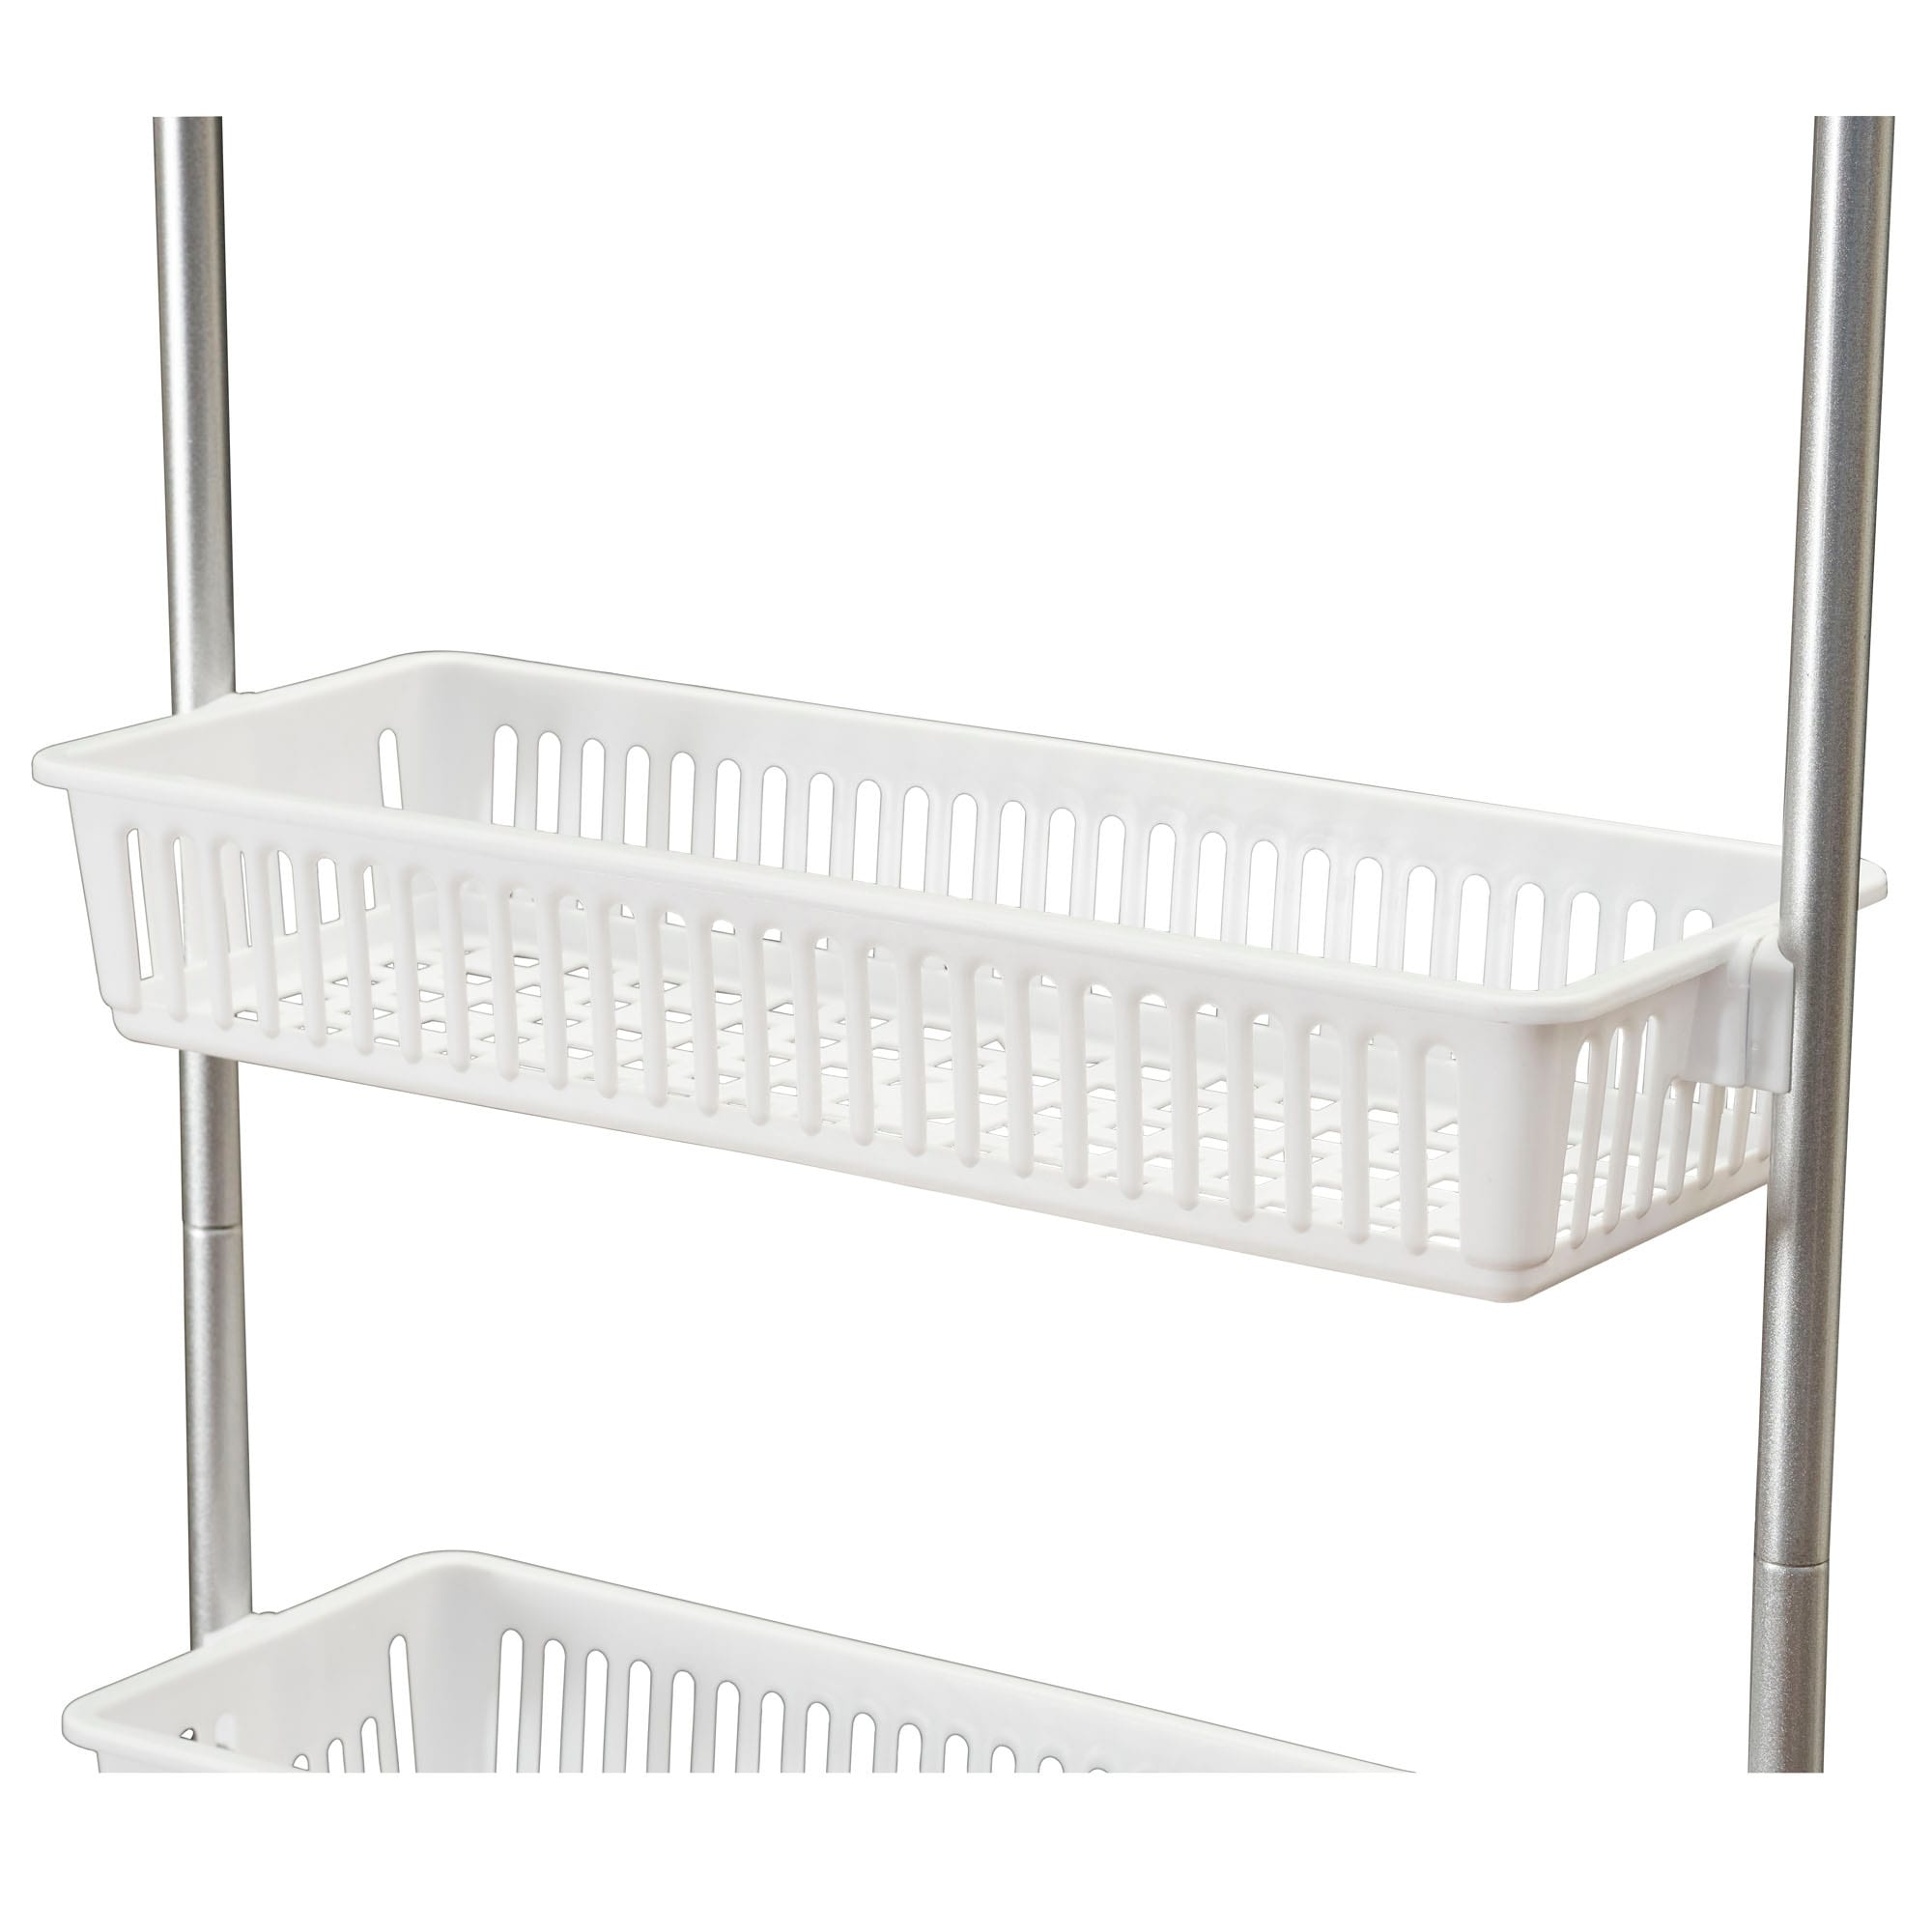 Can Organizer Can Good Organizer for Pantry - On Sale - Bed Bath & Beyond -  37371634